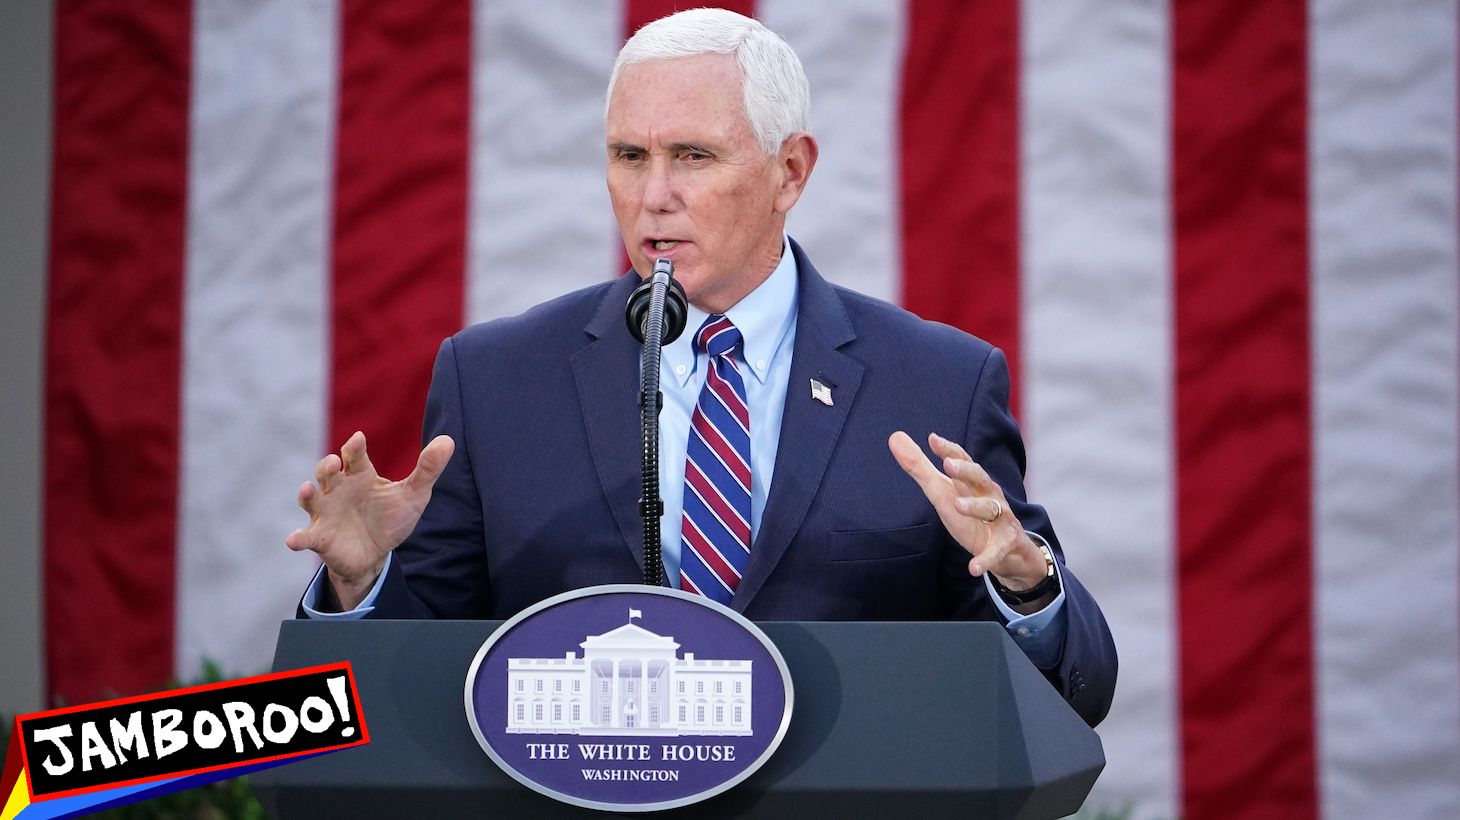 US Vice President Mike Pence delivers an update on "Operation Warp Speed" in the Rose Garden of the White House in Washington, DC on November 13, 2020. (Photo by MANDEL NGAN / AFP) (Photo by